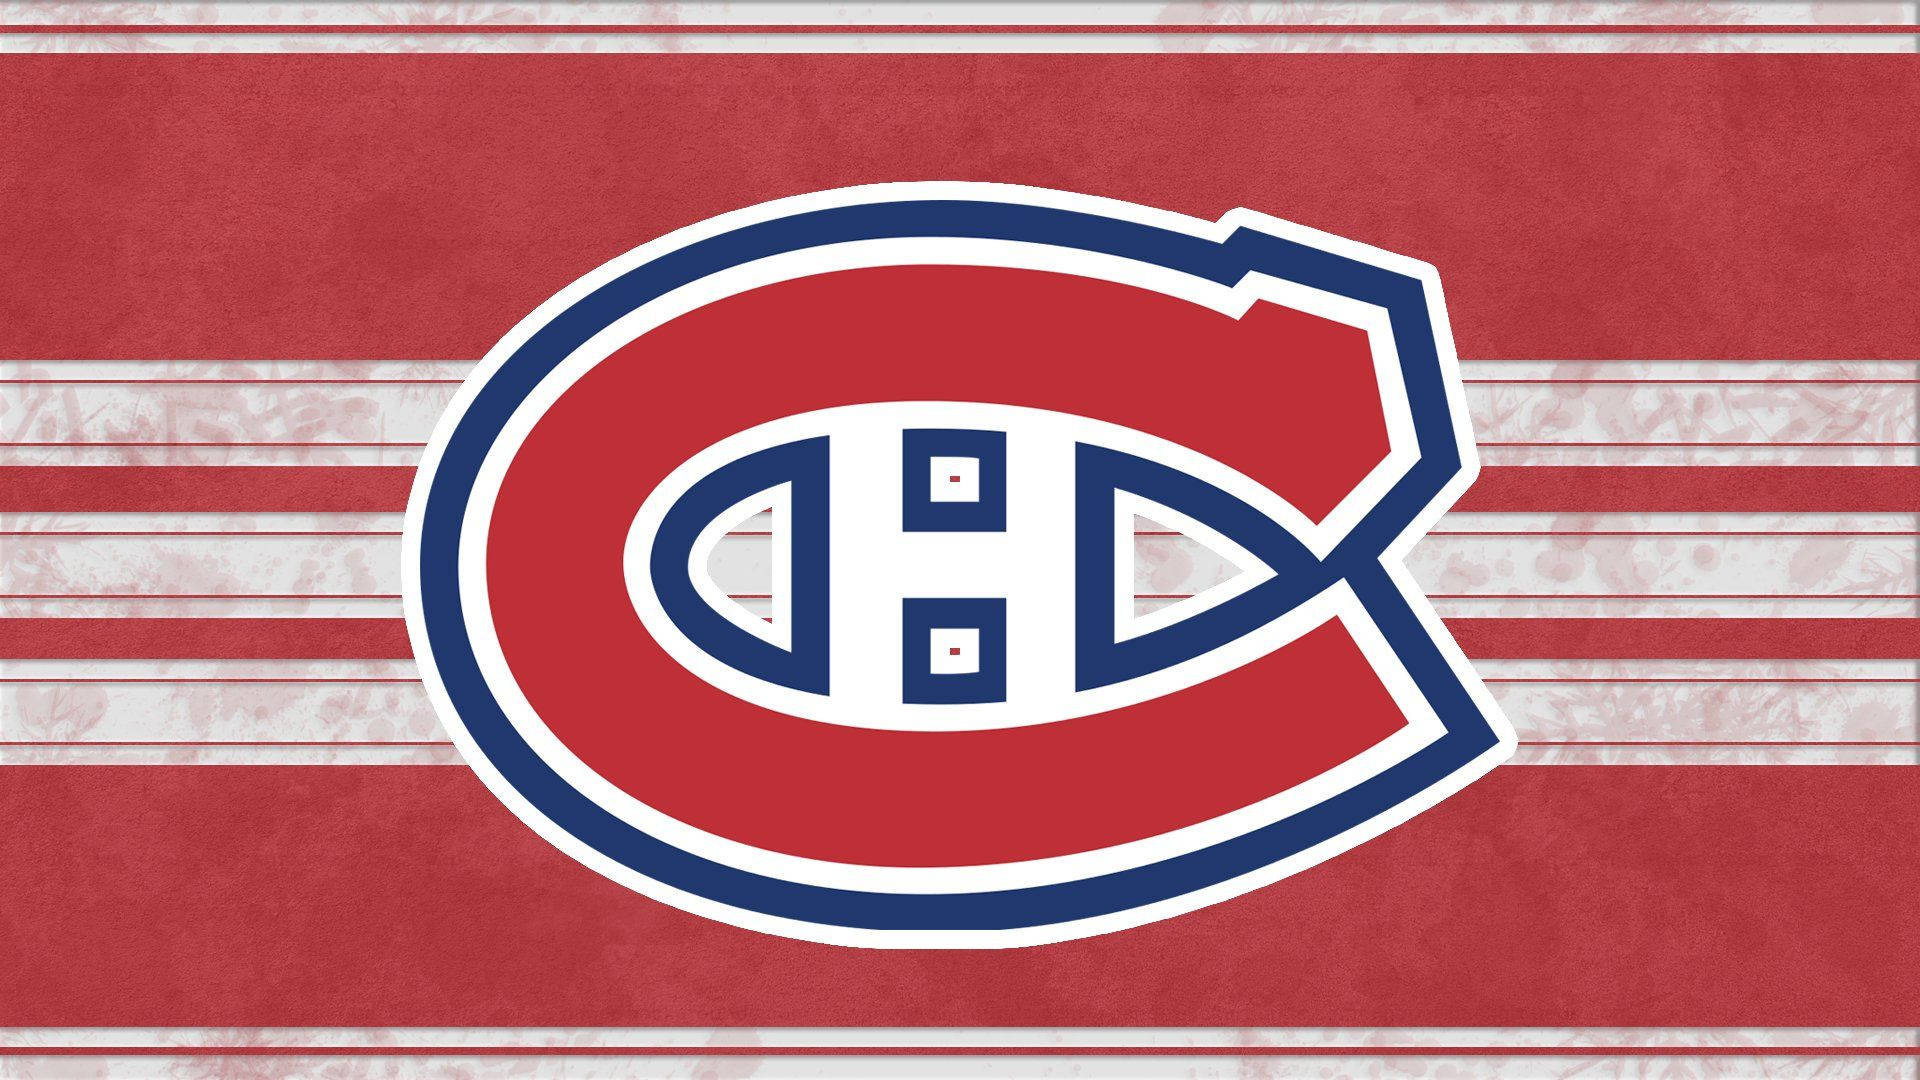 Jersey Montreal Canadiens Logo Background